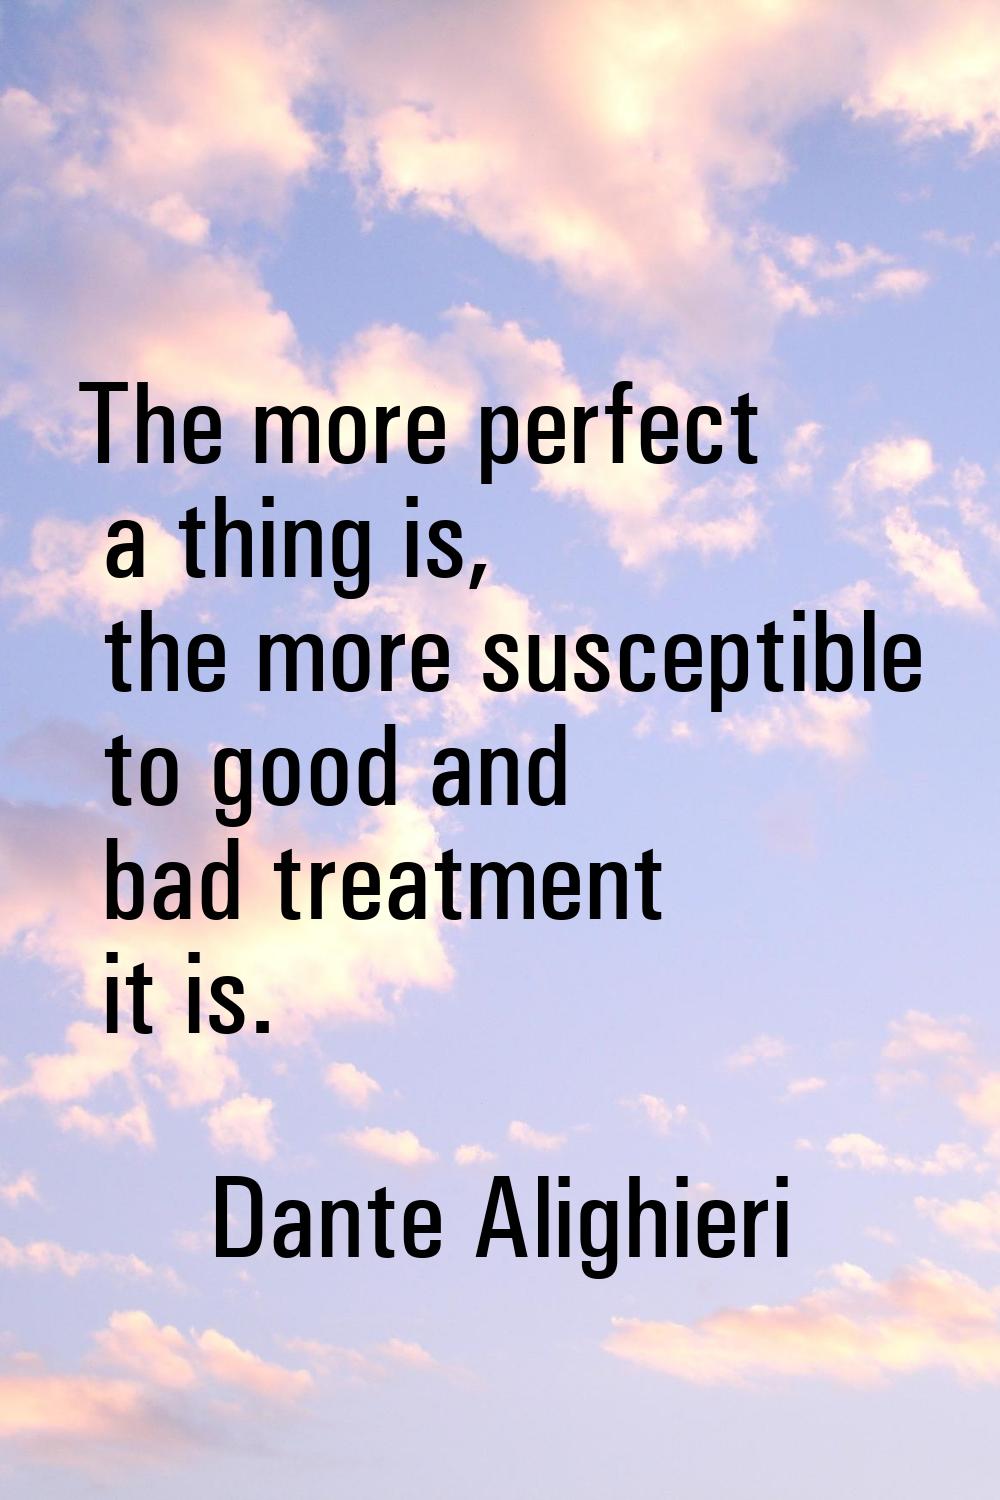 The more perfect a thing is, the more susceptible to good and bad treatment it is.